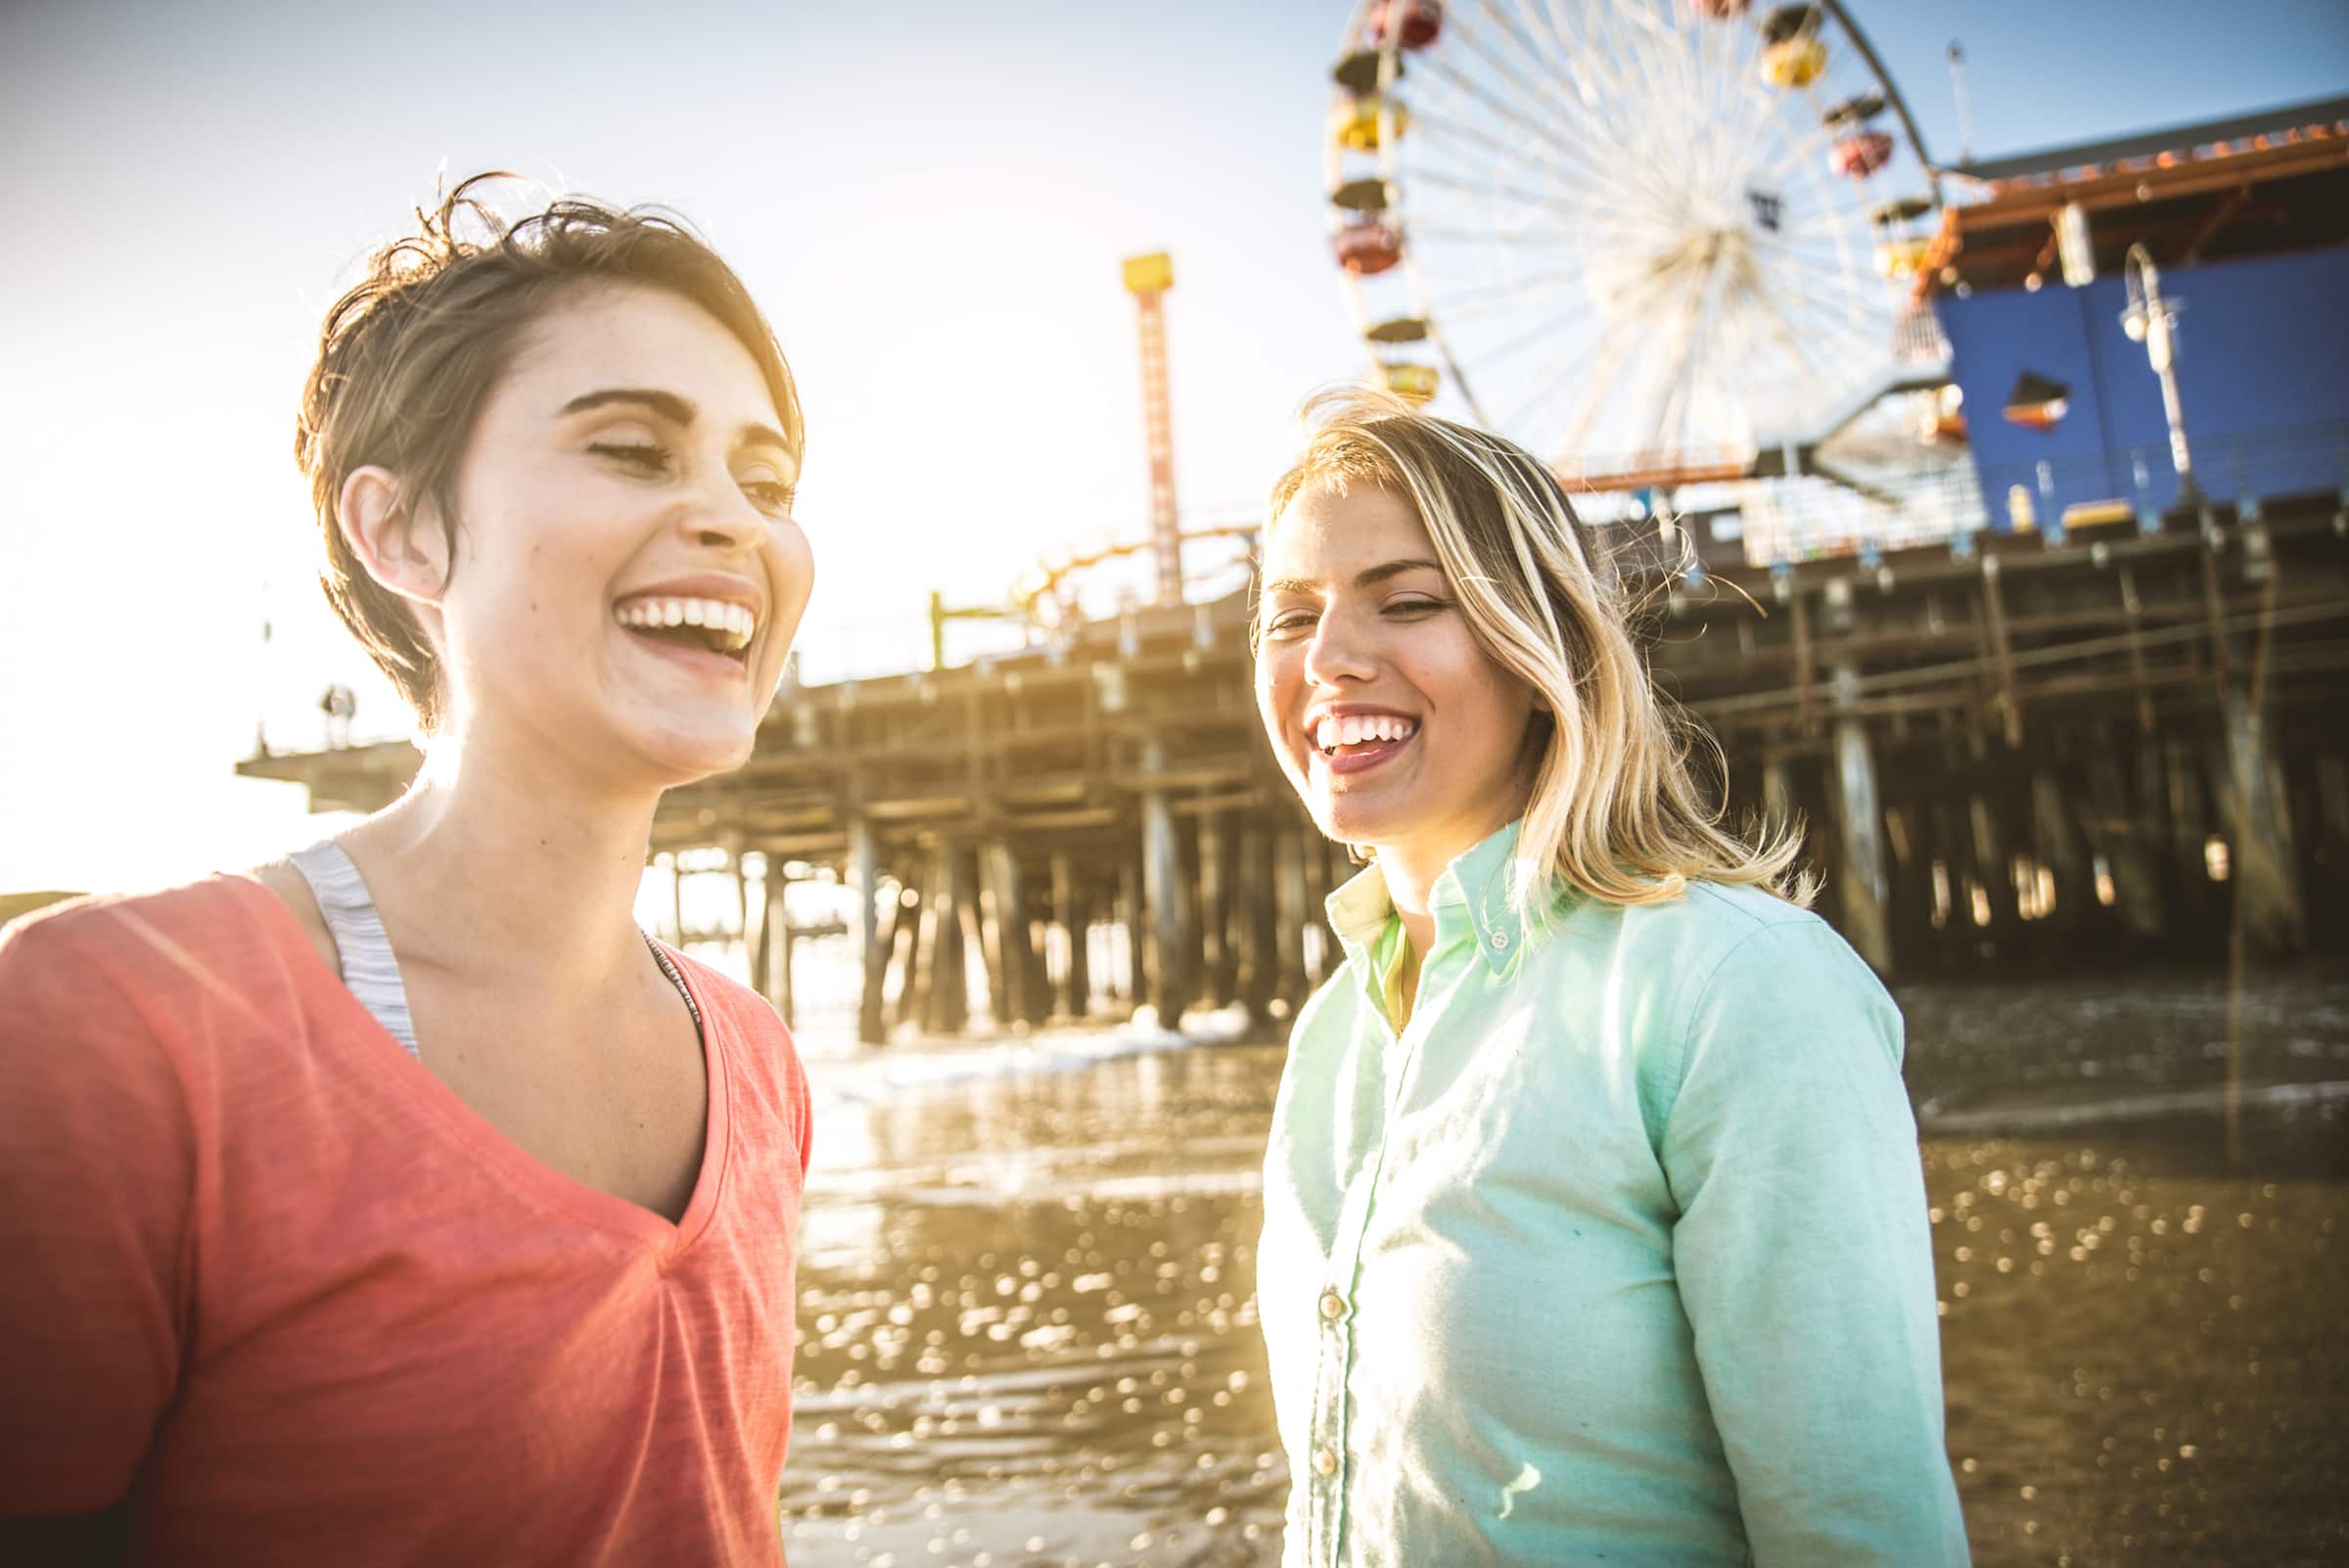 two women at the beach smiling brightly